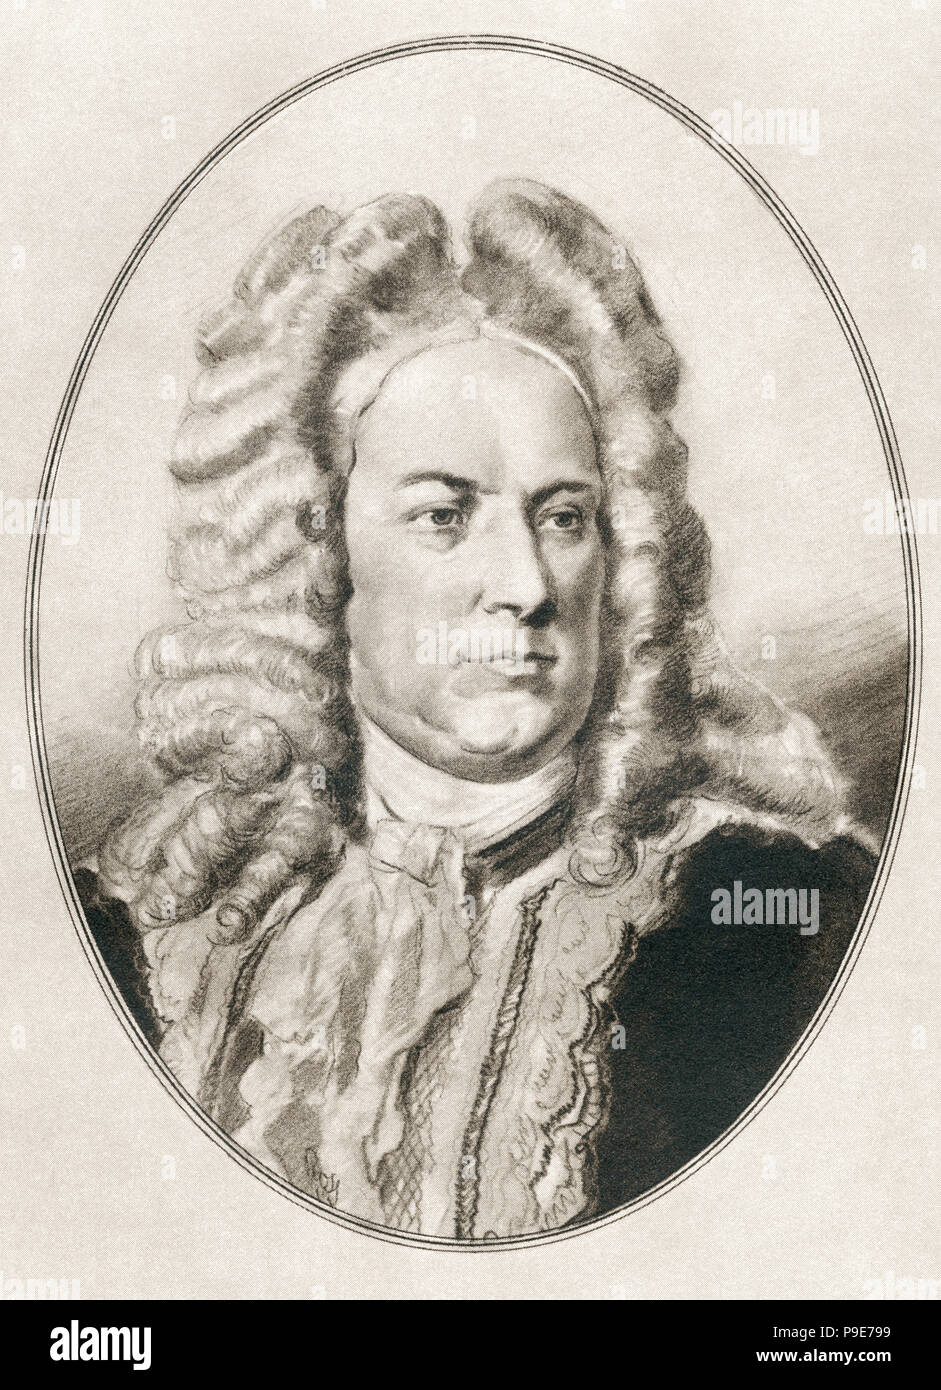 George Frideric or Frederick Handel, 1685 - 1759. German, later British, Baroque composer.  Illustration by Gordon Ross, American artist and illustrator (1873-1946), from Living Biographies of Great Composers. Stock Photo